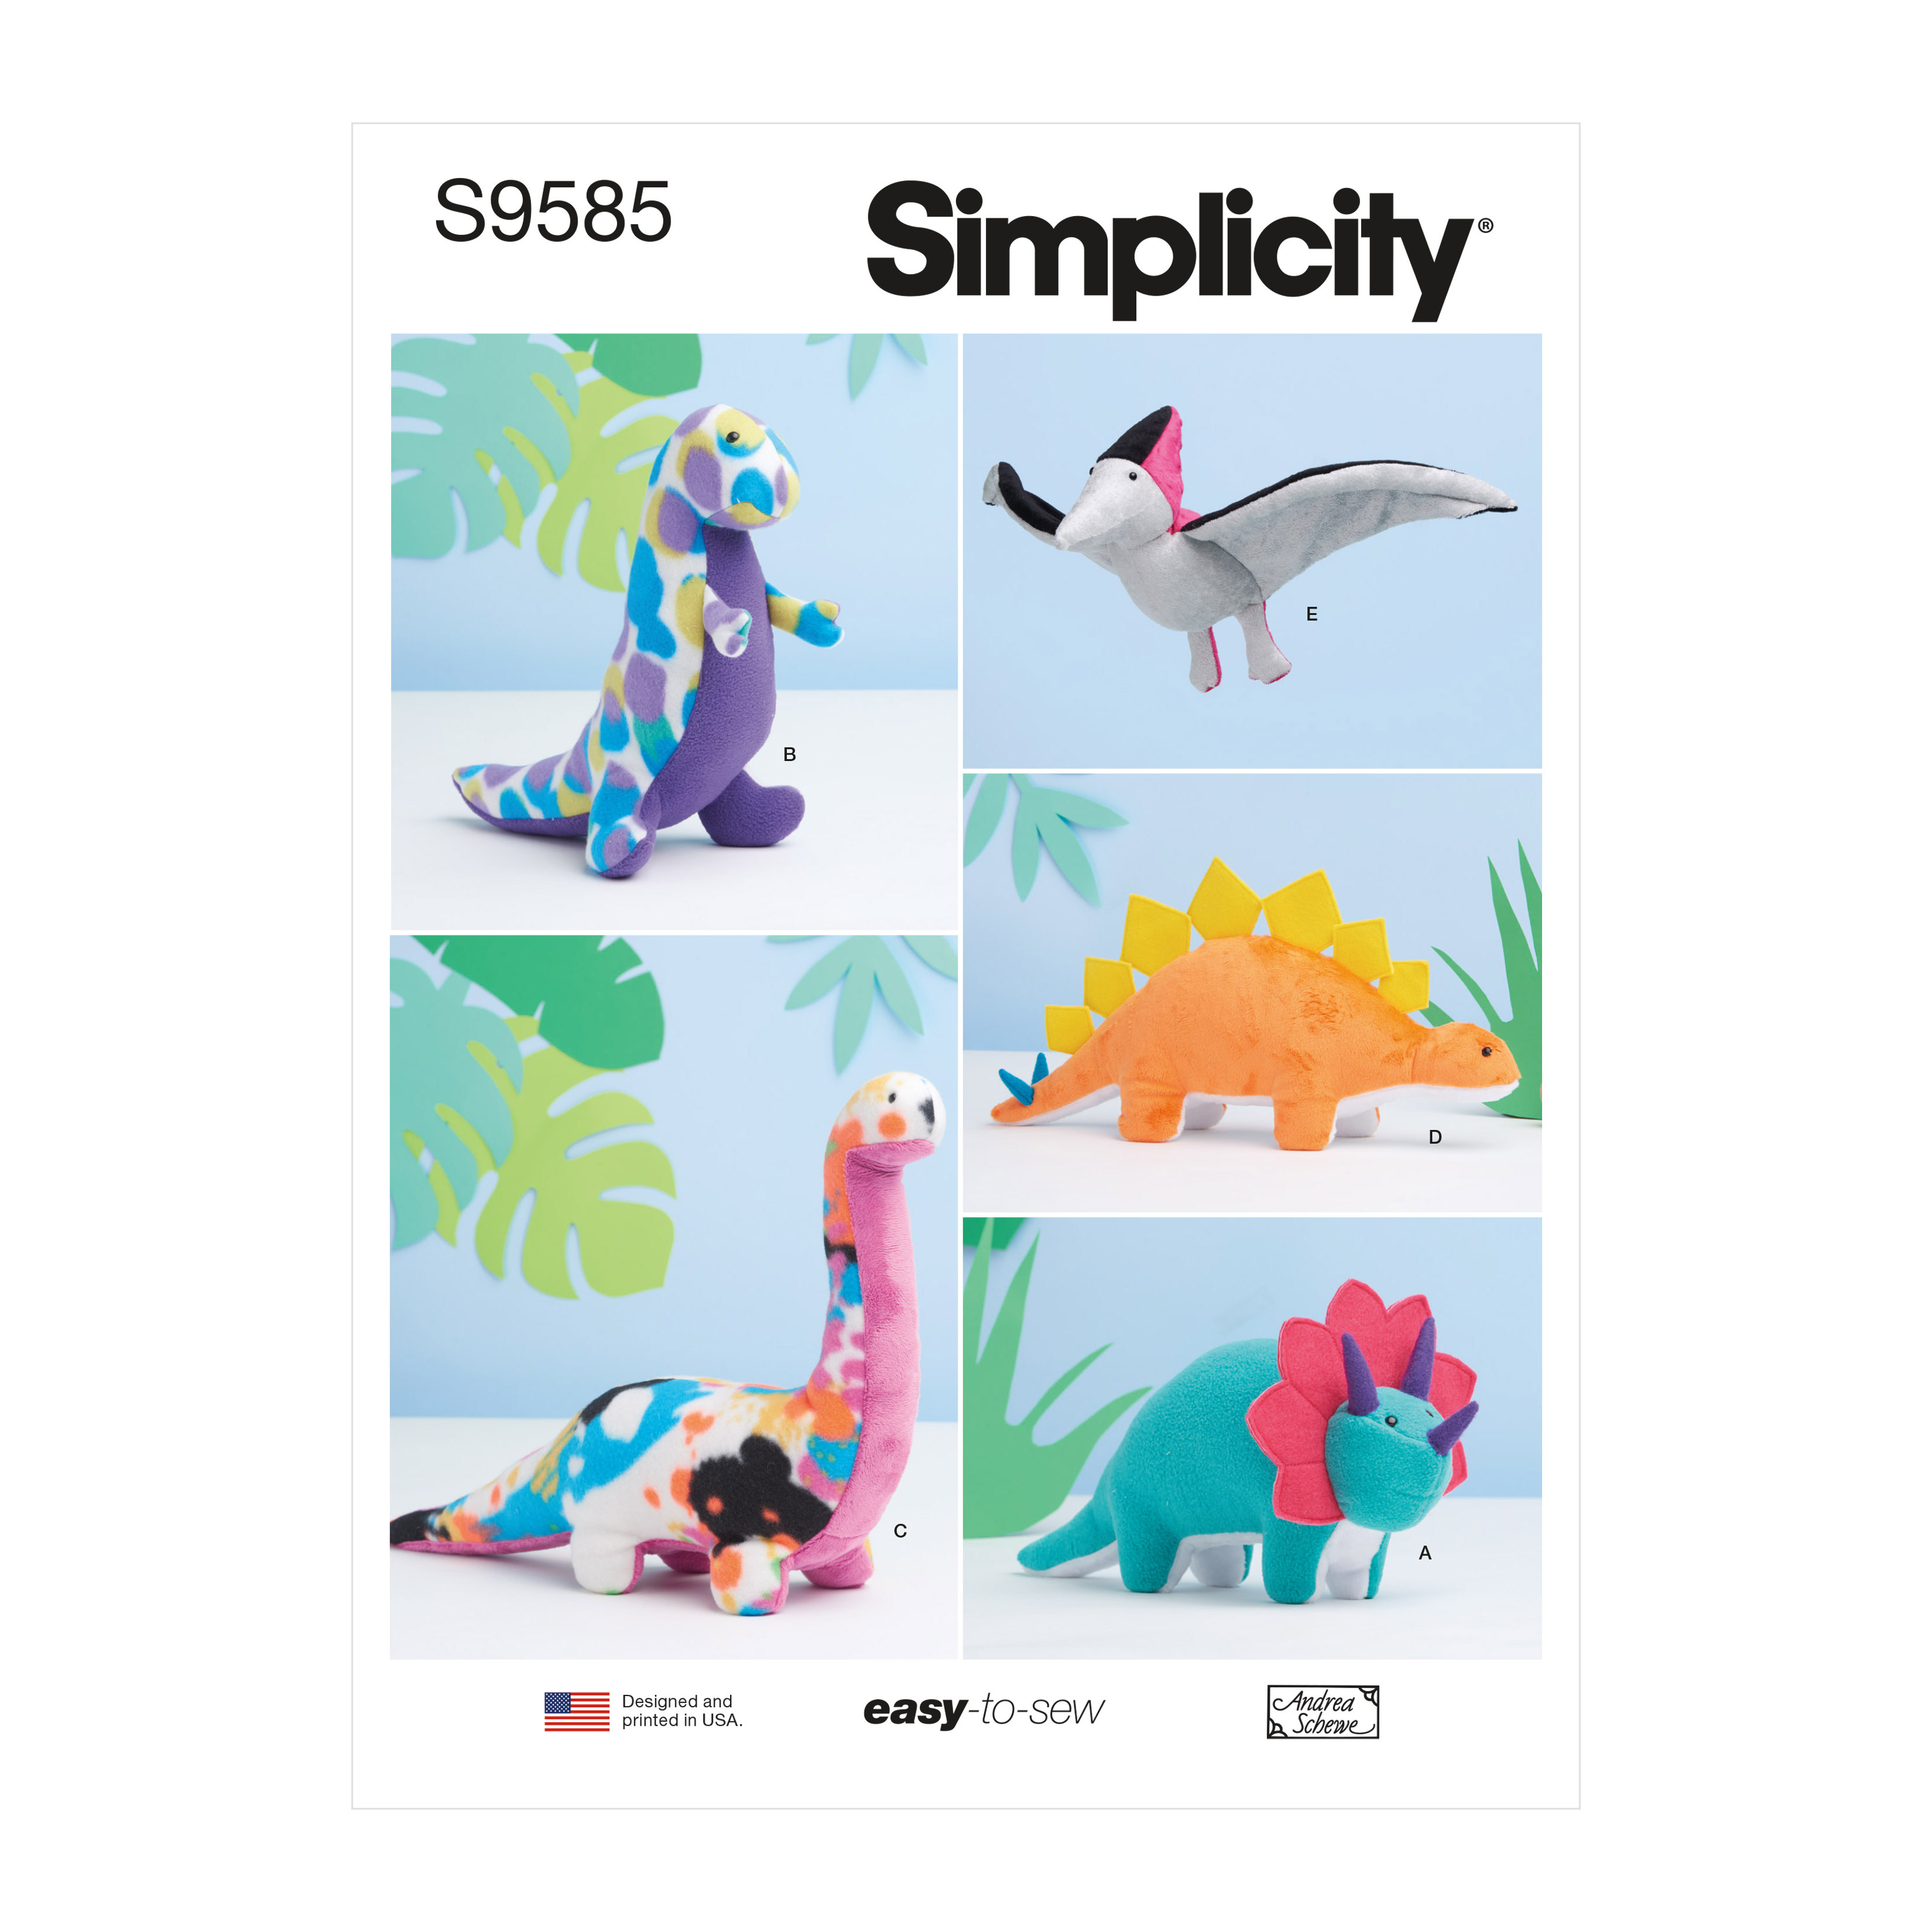 New Simplicity 8158 Pattern Mermaid Fairy and Pixie Patterns for